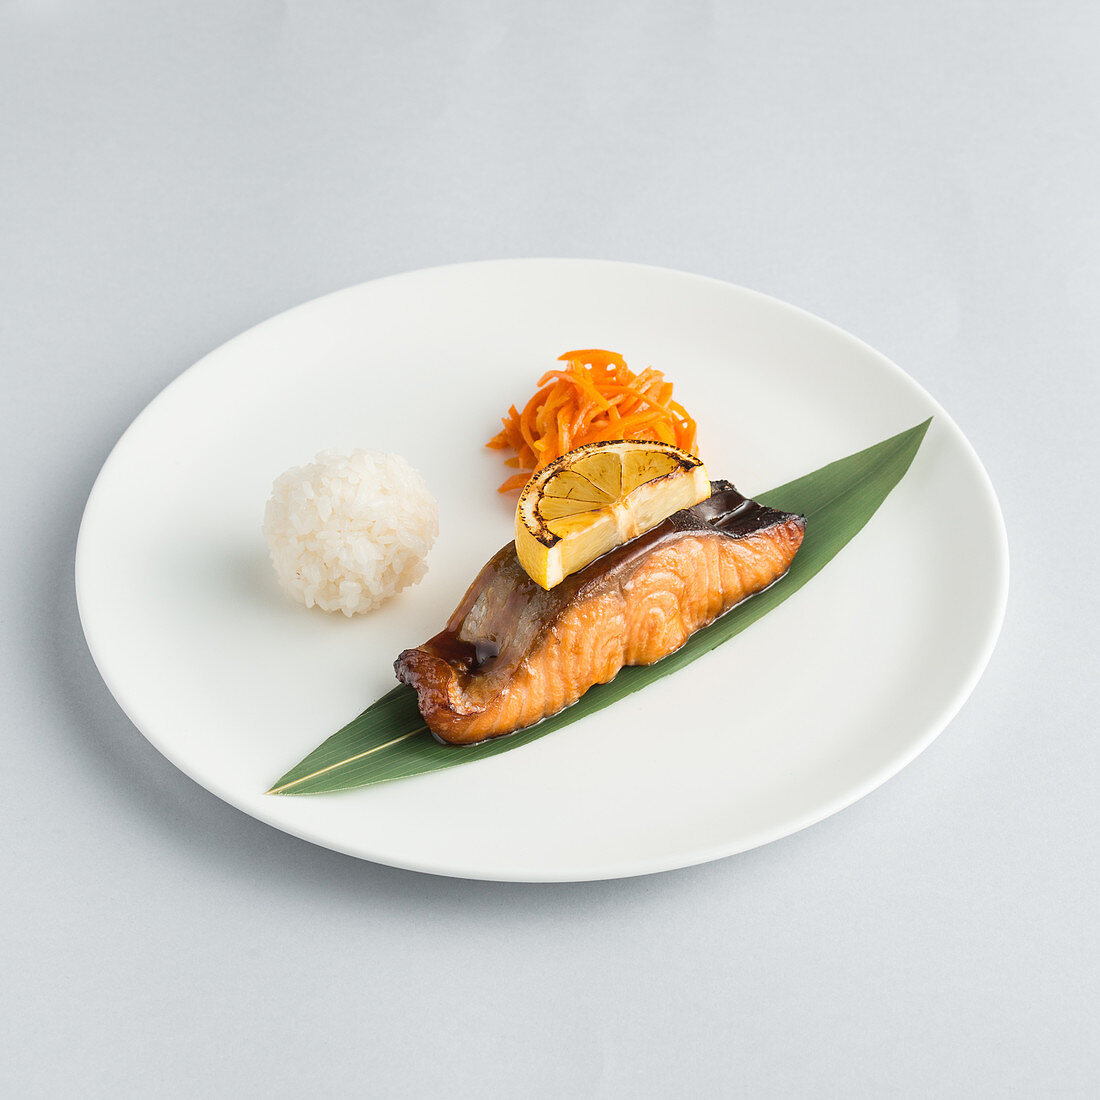 Salmon served with rice and grated carrot on a plate (Japan)